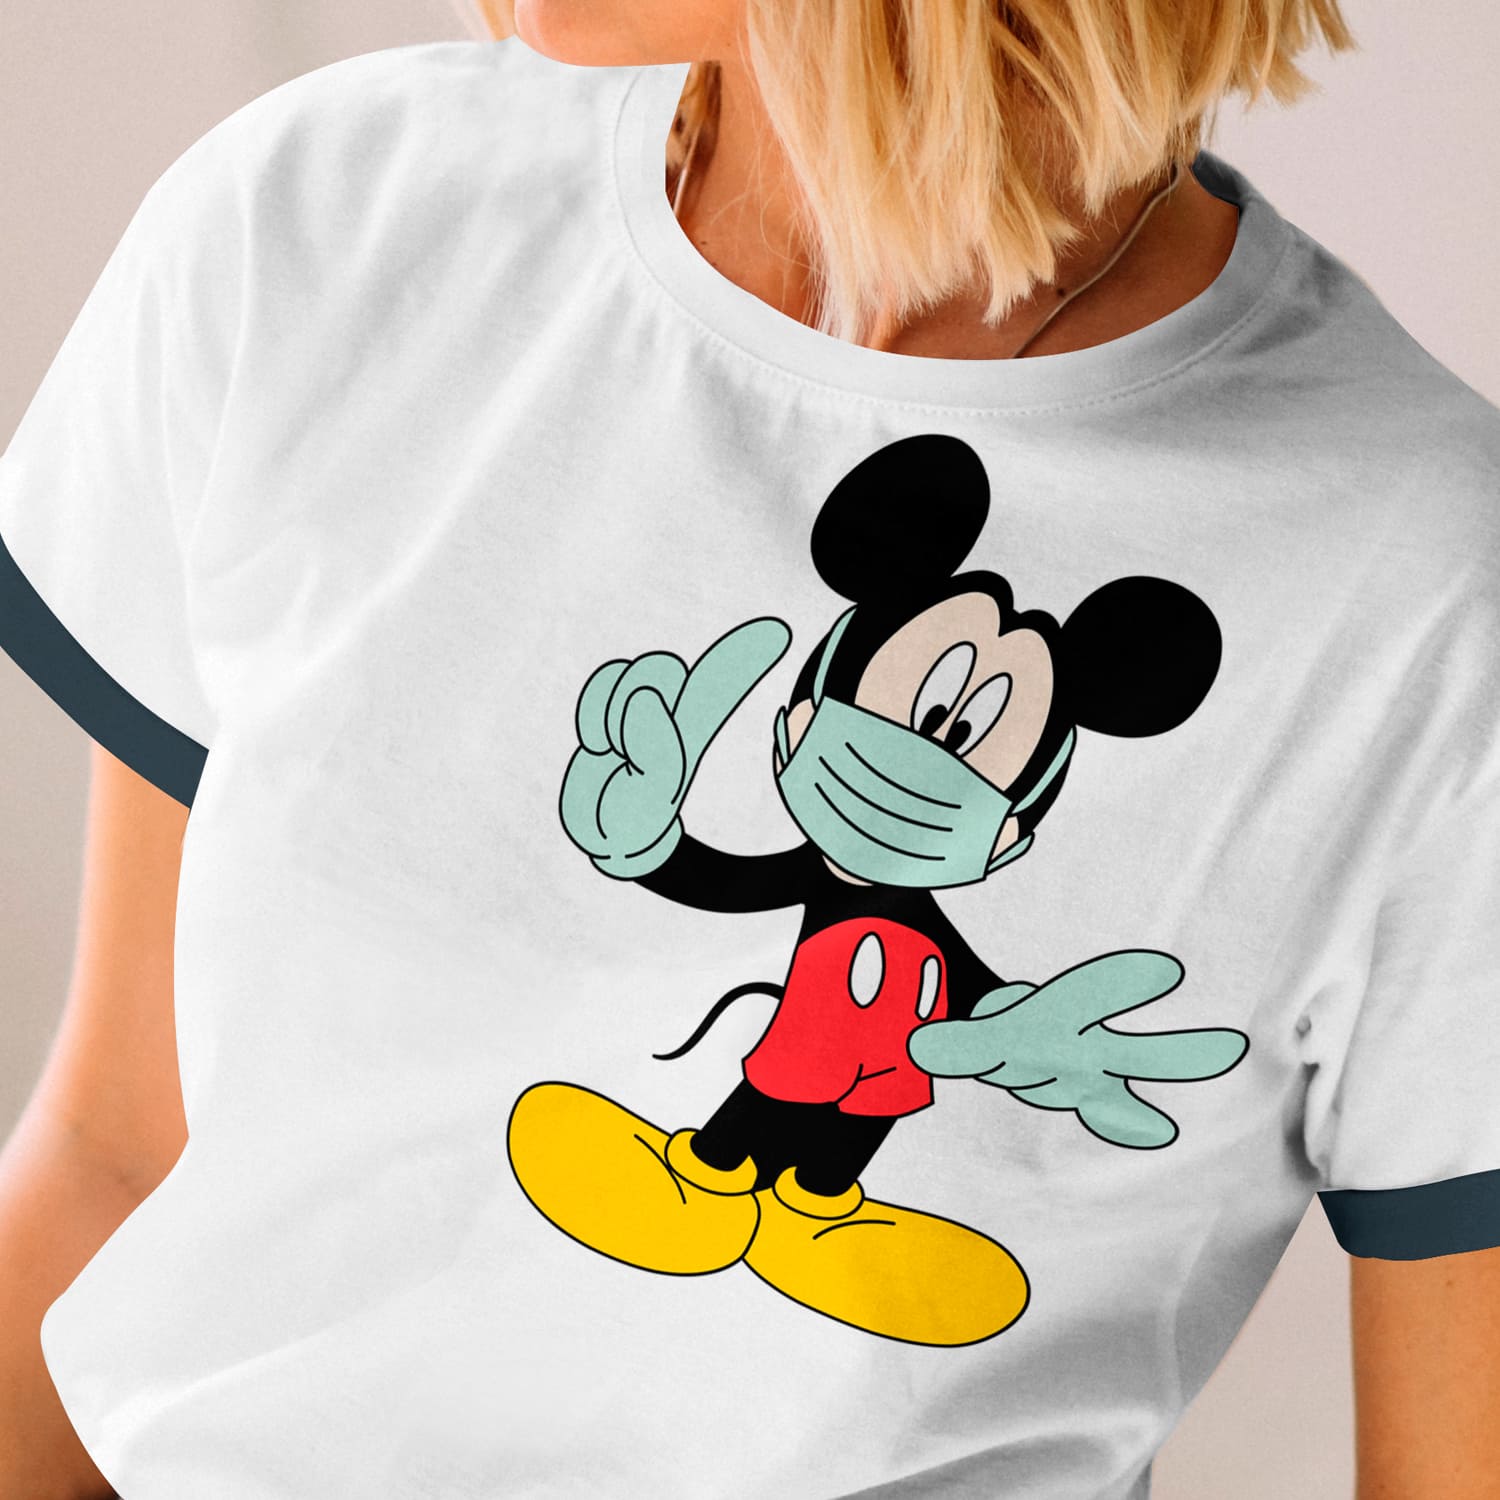 T-shirt design with Mickey Mouse With Mask SVG image.